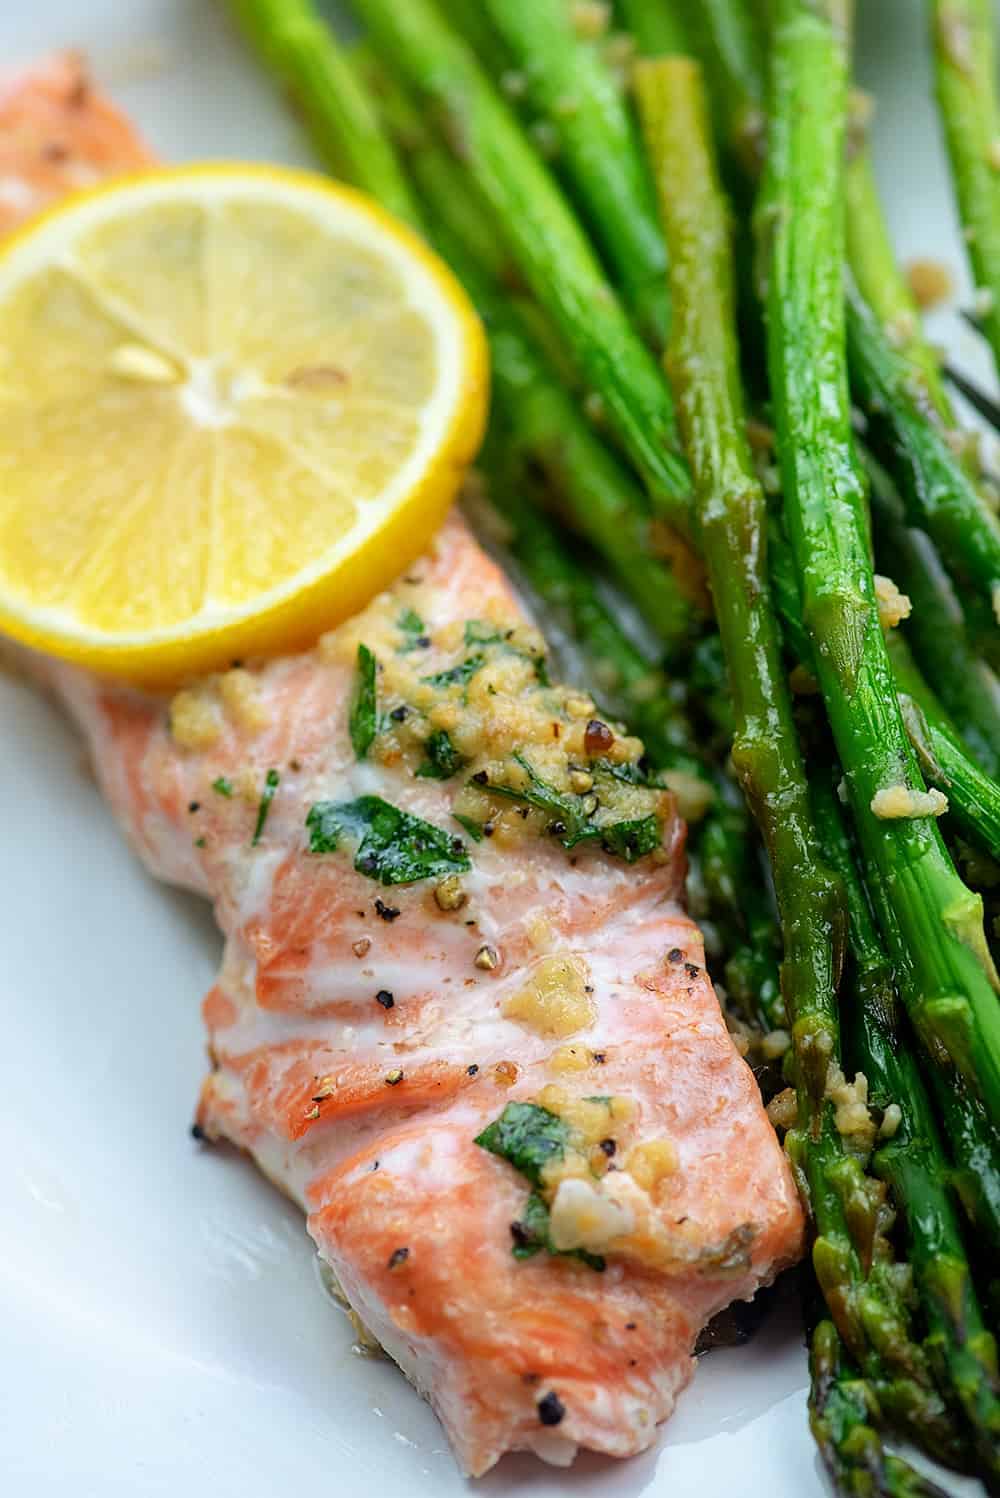 Overhead view of salmon and asparagus on a plate.